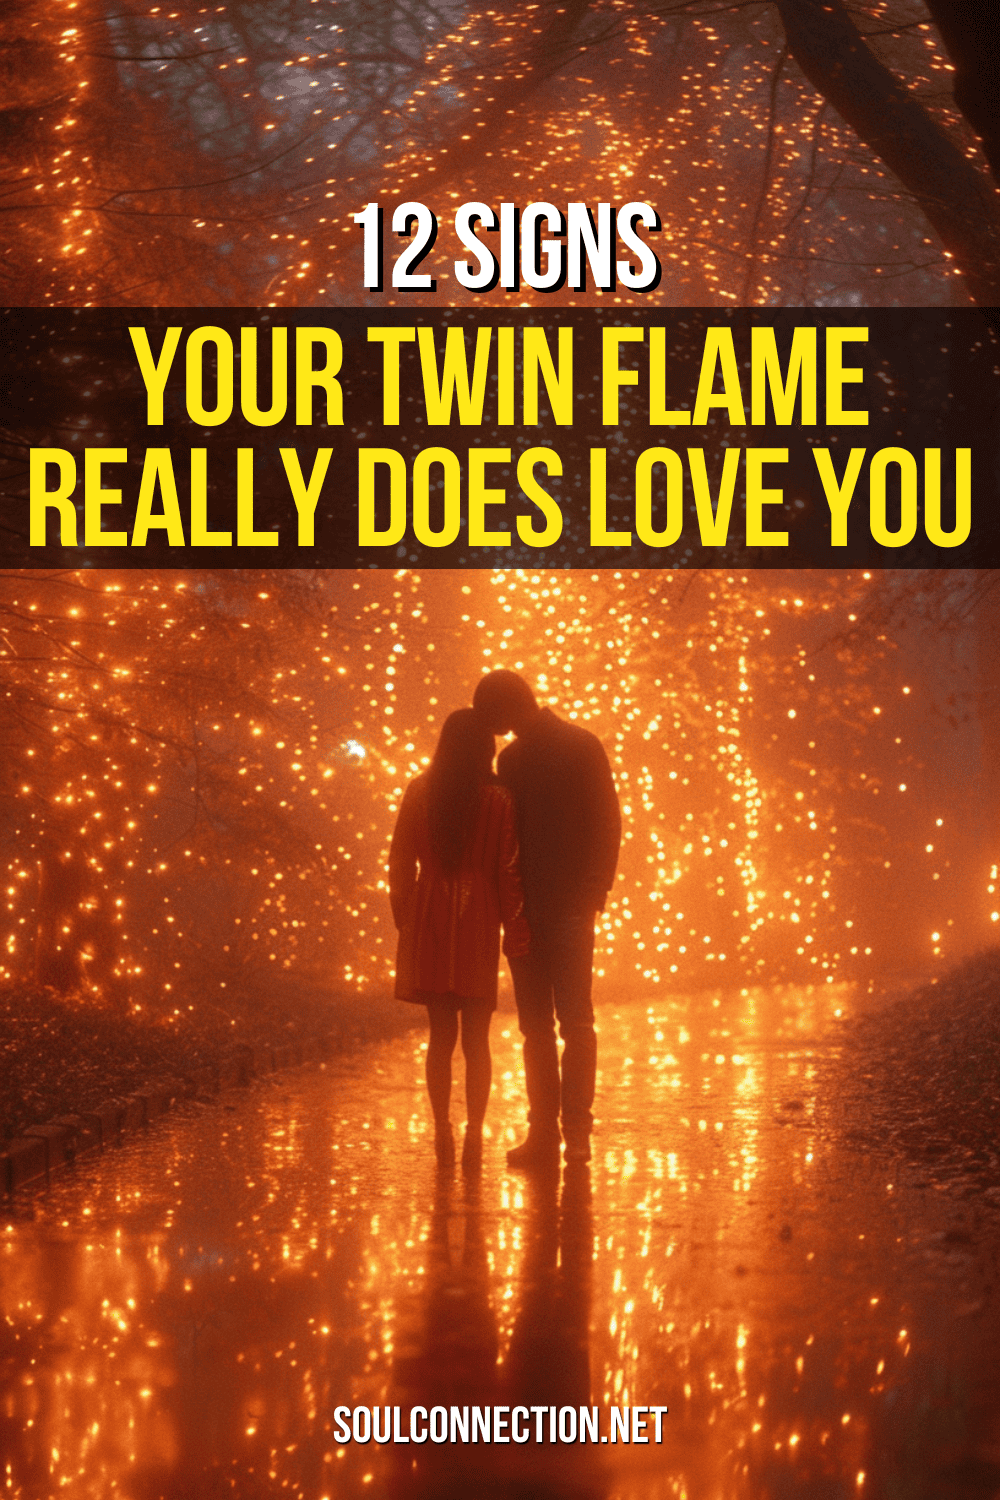 Top 12 Signs Your Twin Flame Truly Loves You - SoulConnection.net